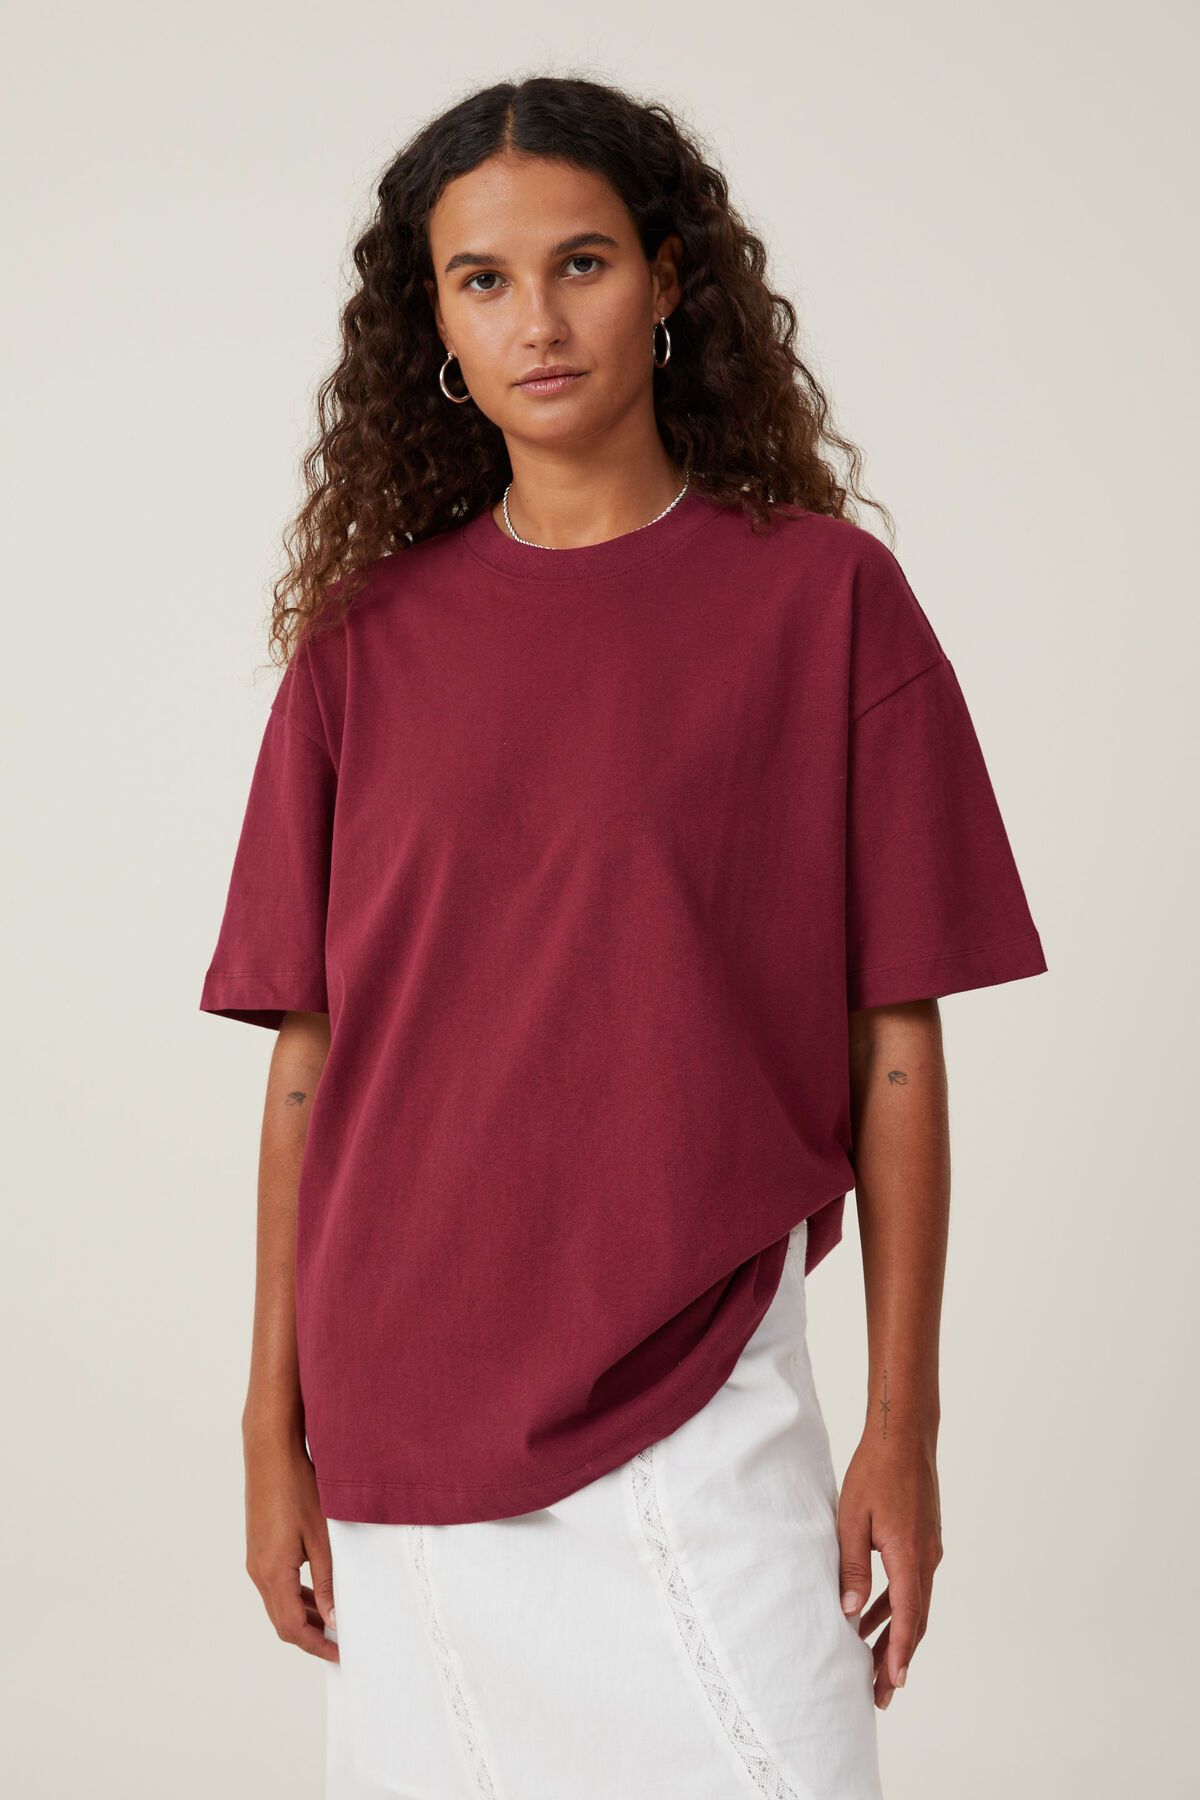 The Boxy Oversized Tee | Cotton On (ANZ)